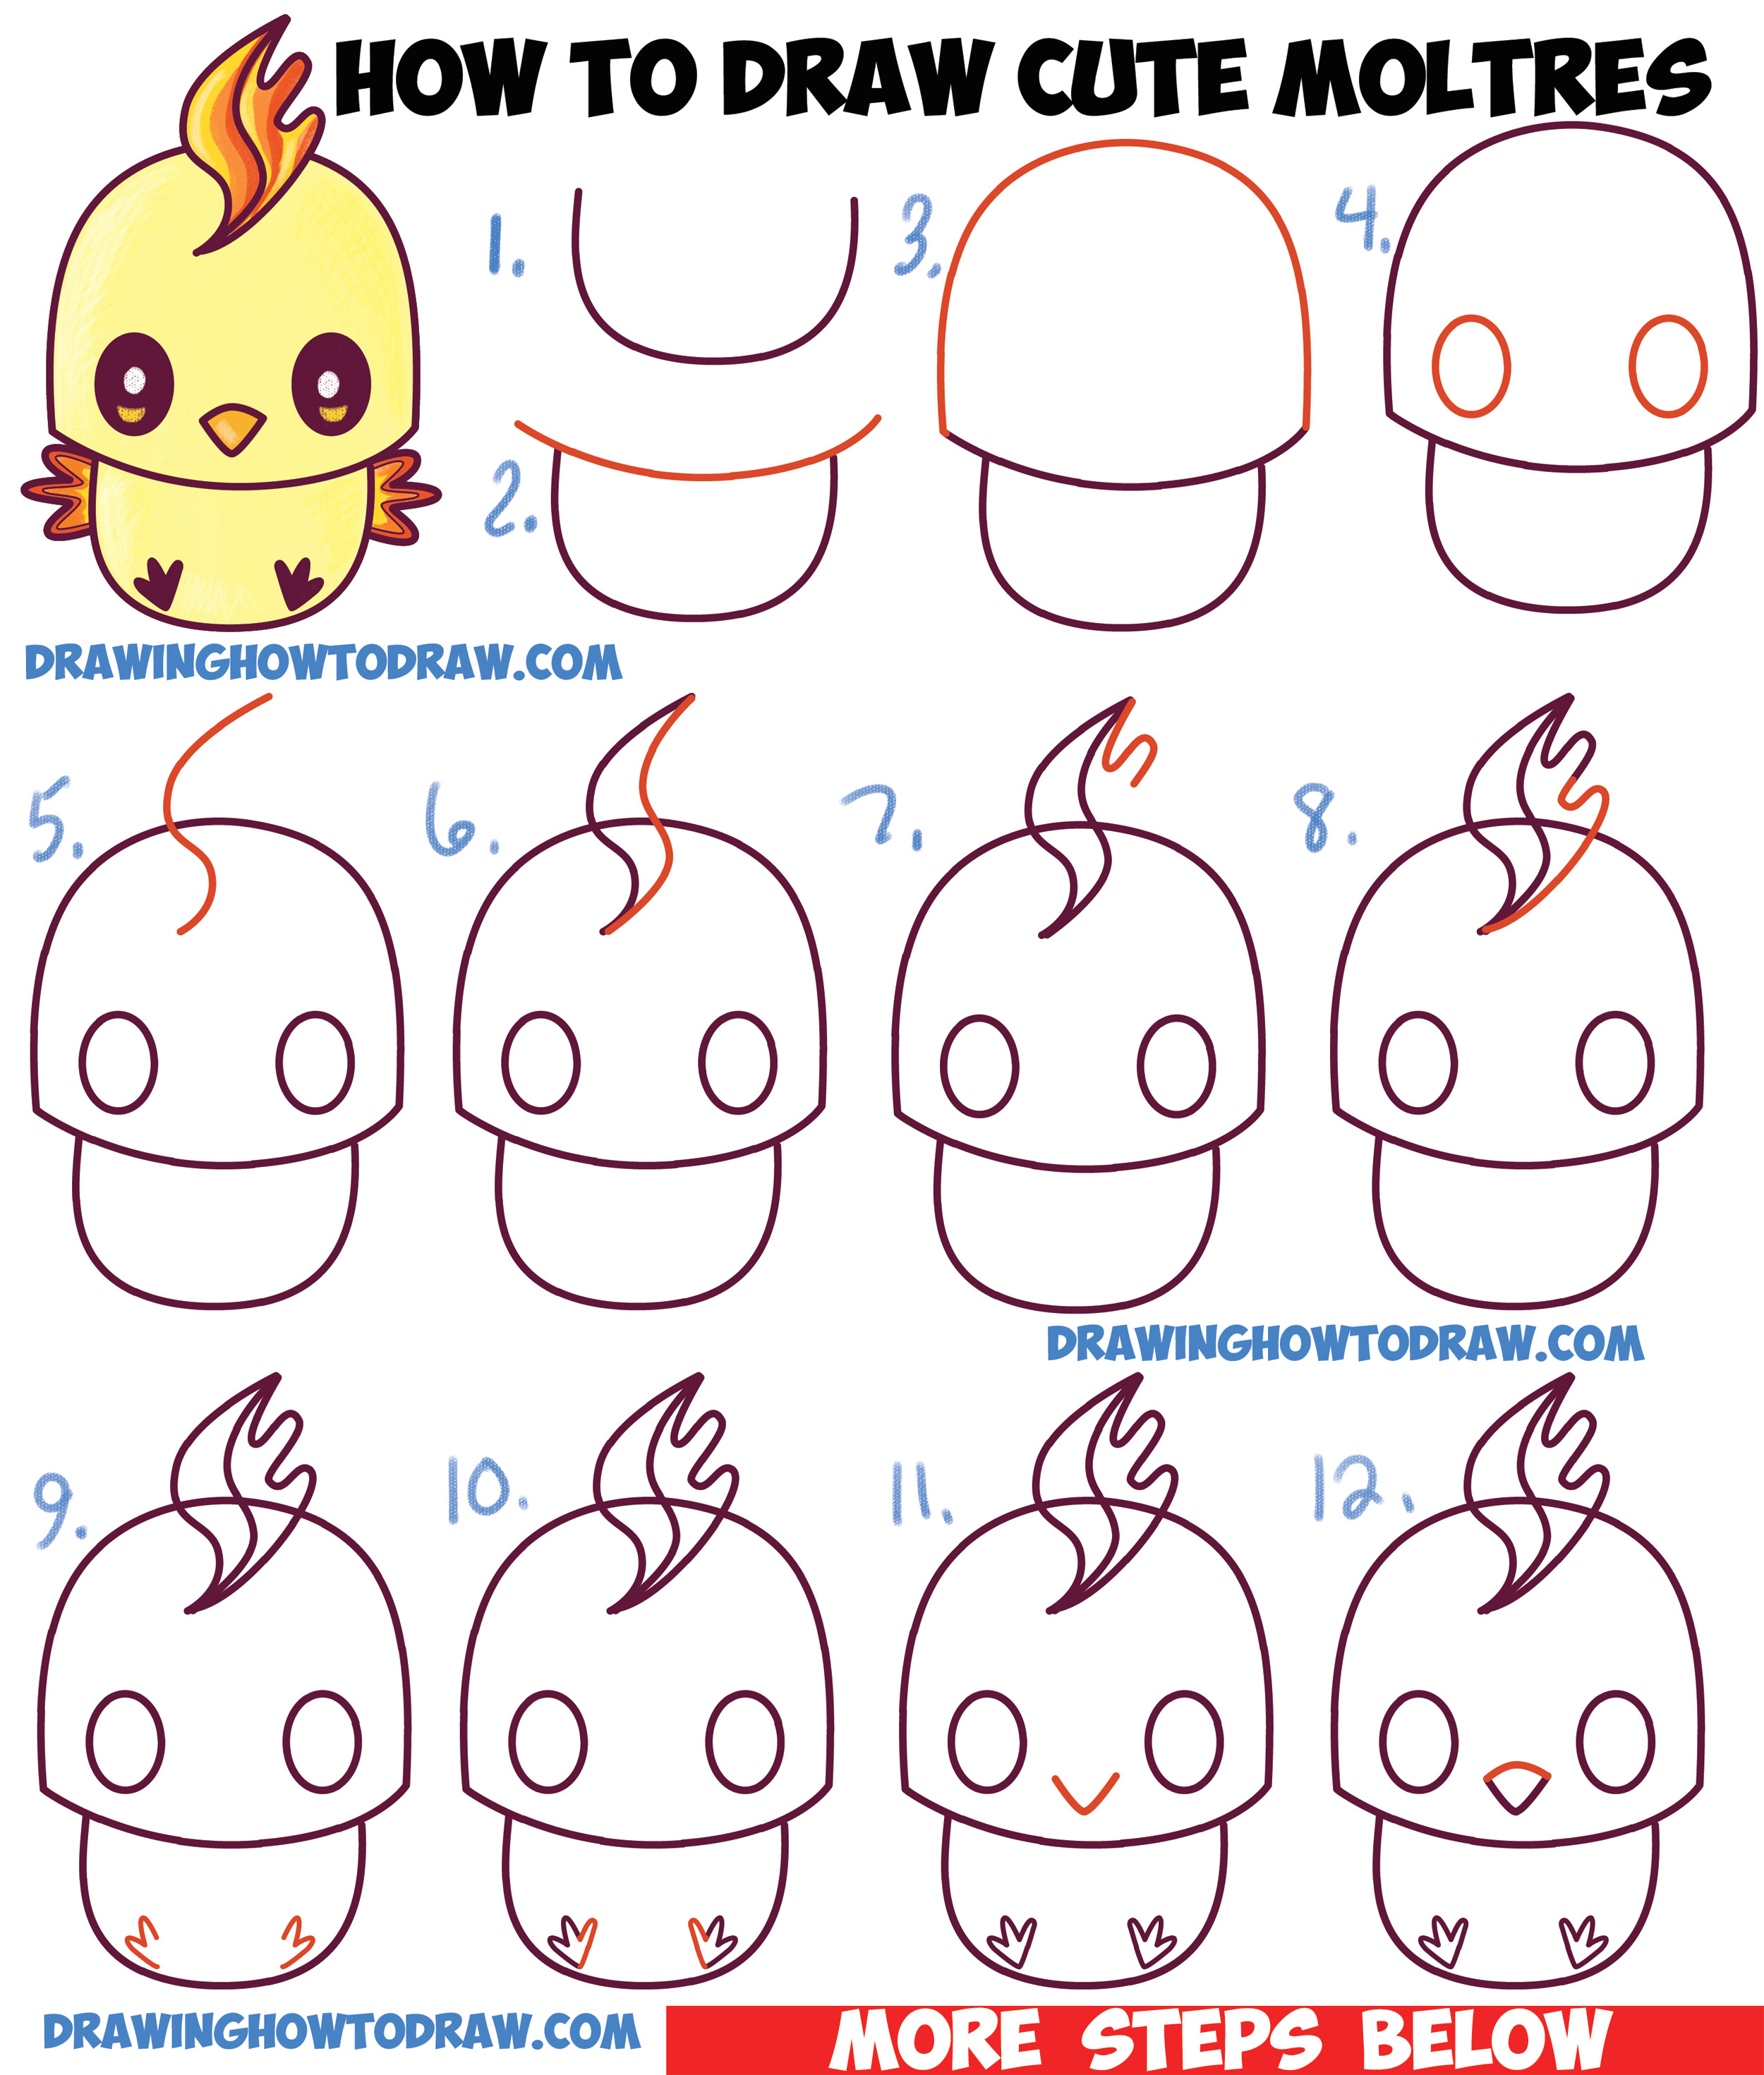 how to draw cute kawaii chibi moltres from pokemon in easy step by step